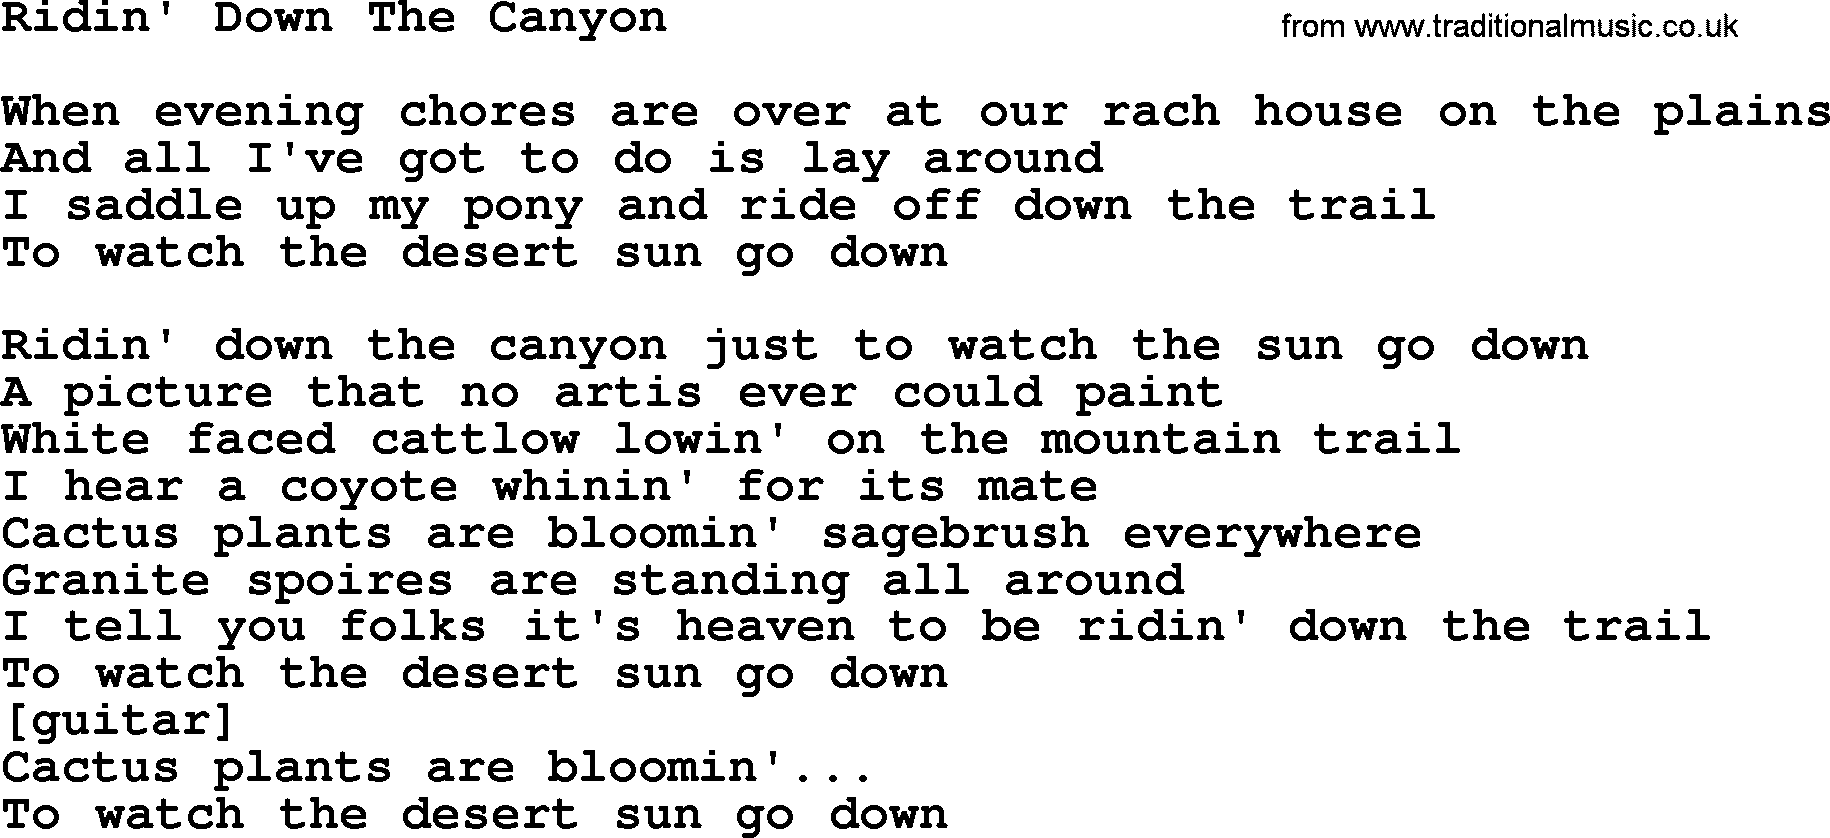 Willie Nelson song: Ridin' Down The Canyon lyrics